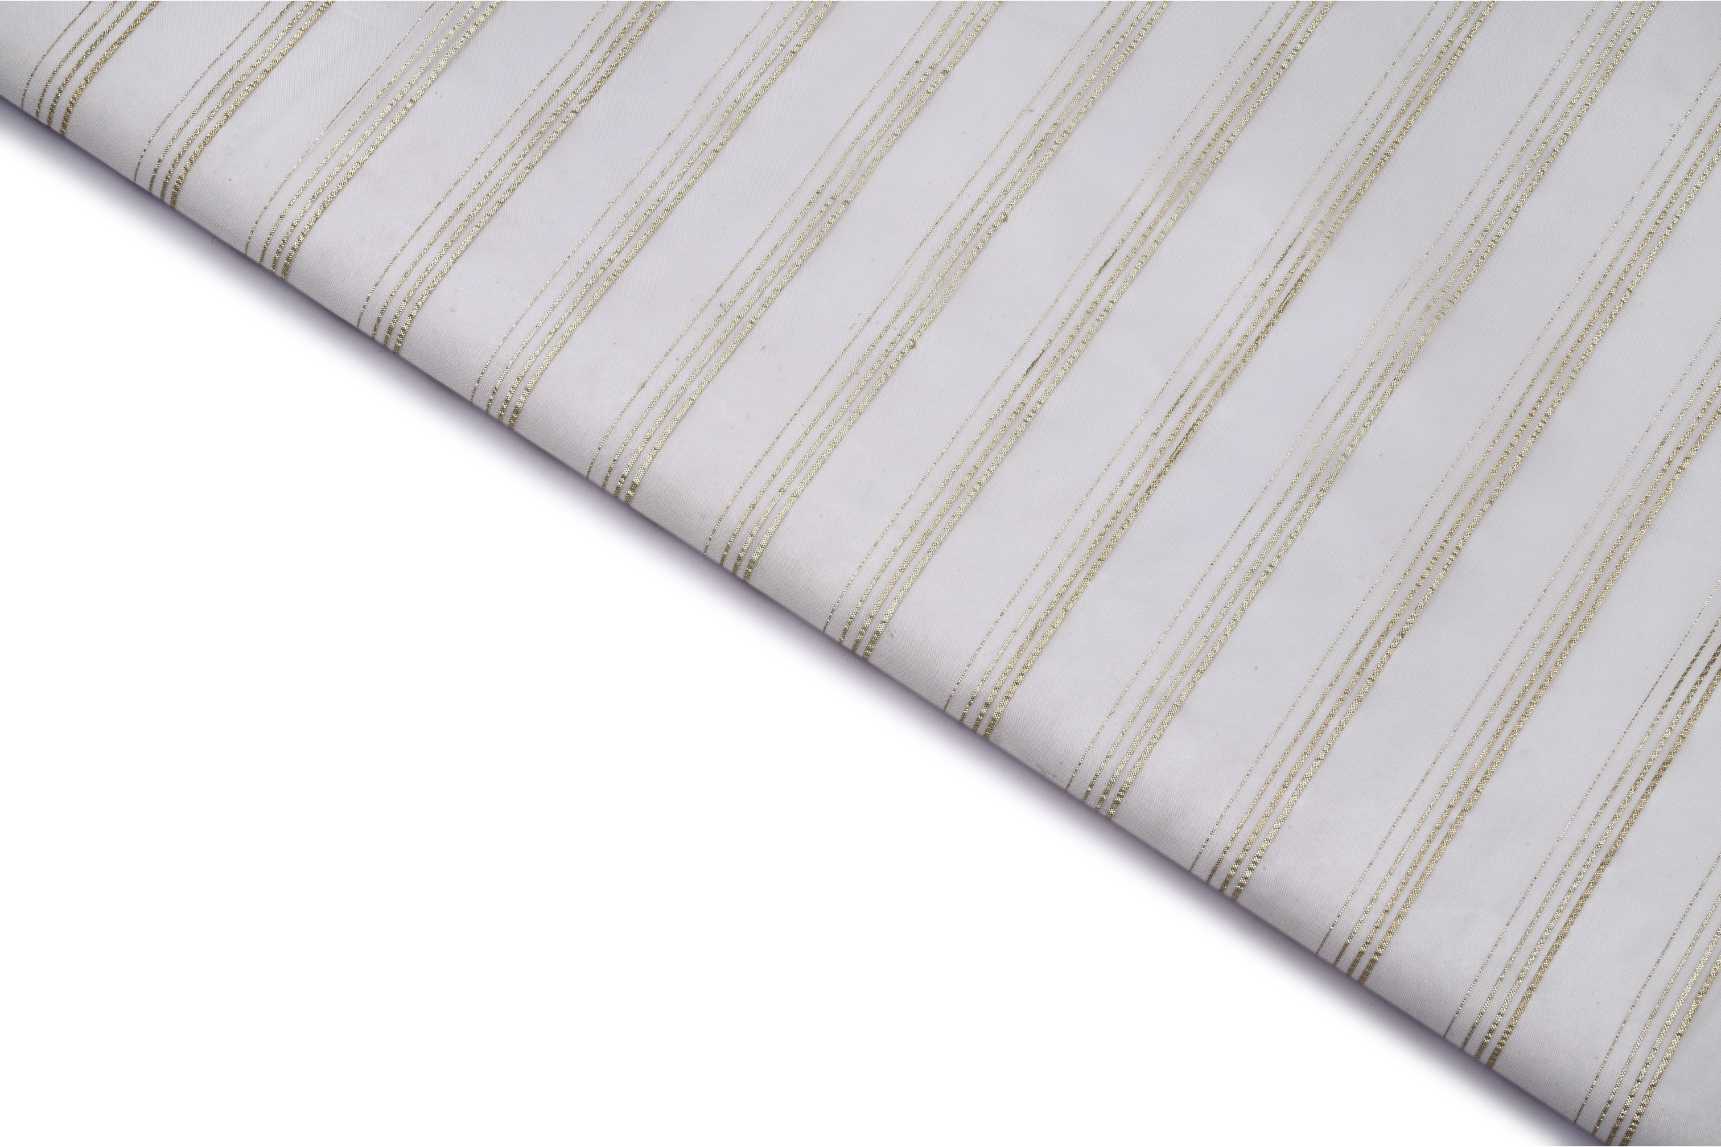 DIABLE  OFF WHITE COLOR WISCOSS ORGANZA GOLD STRIPES WEAVE PATTERN JAQARD FABRIC 11149